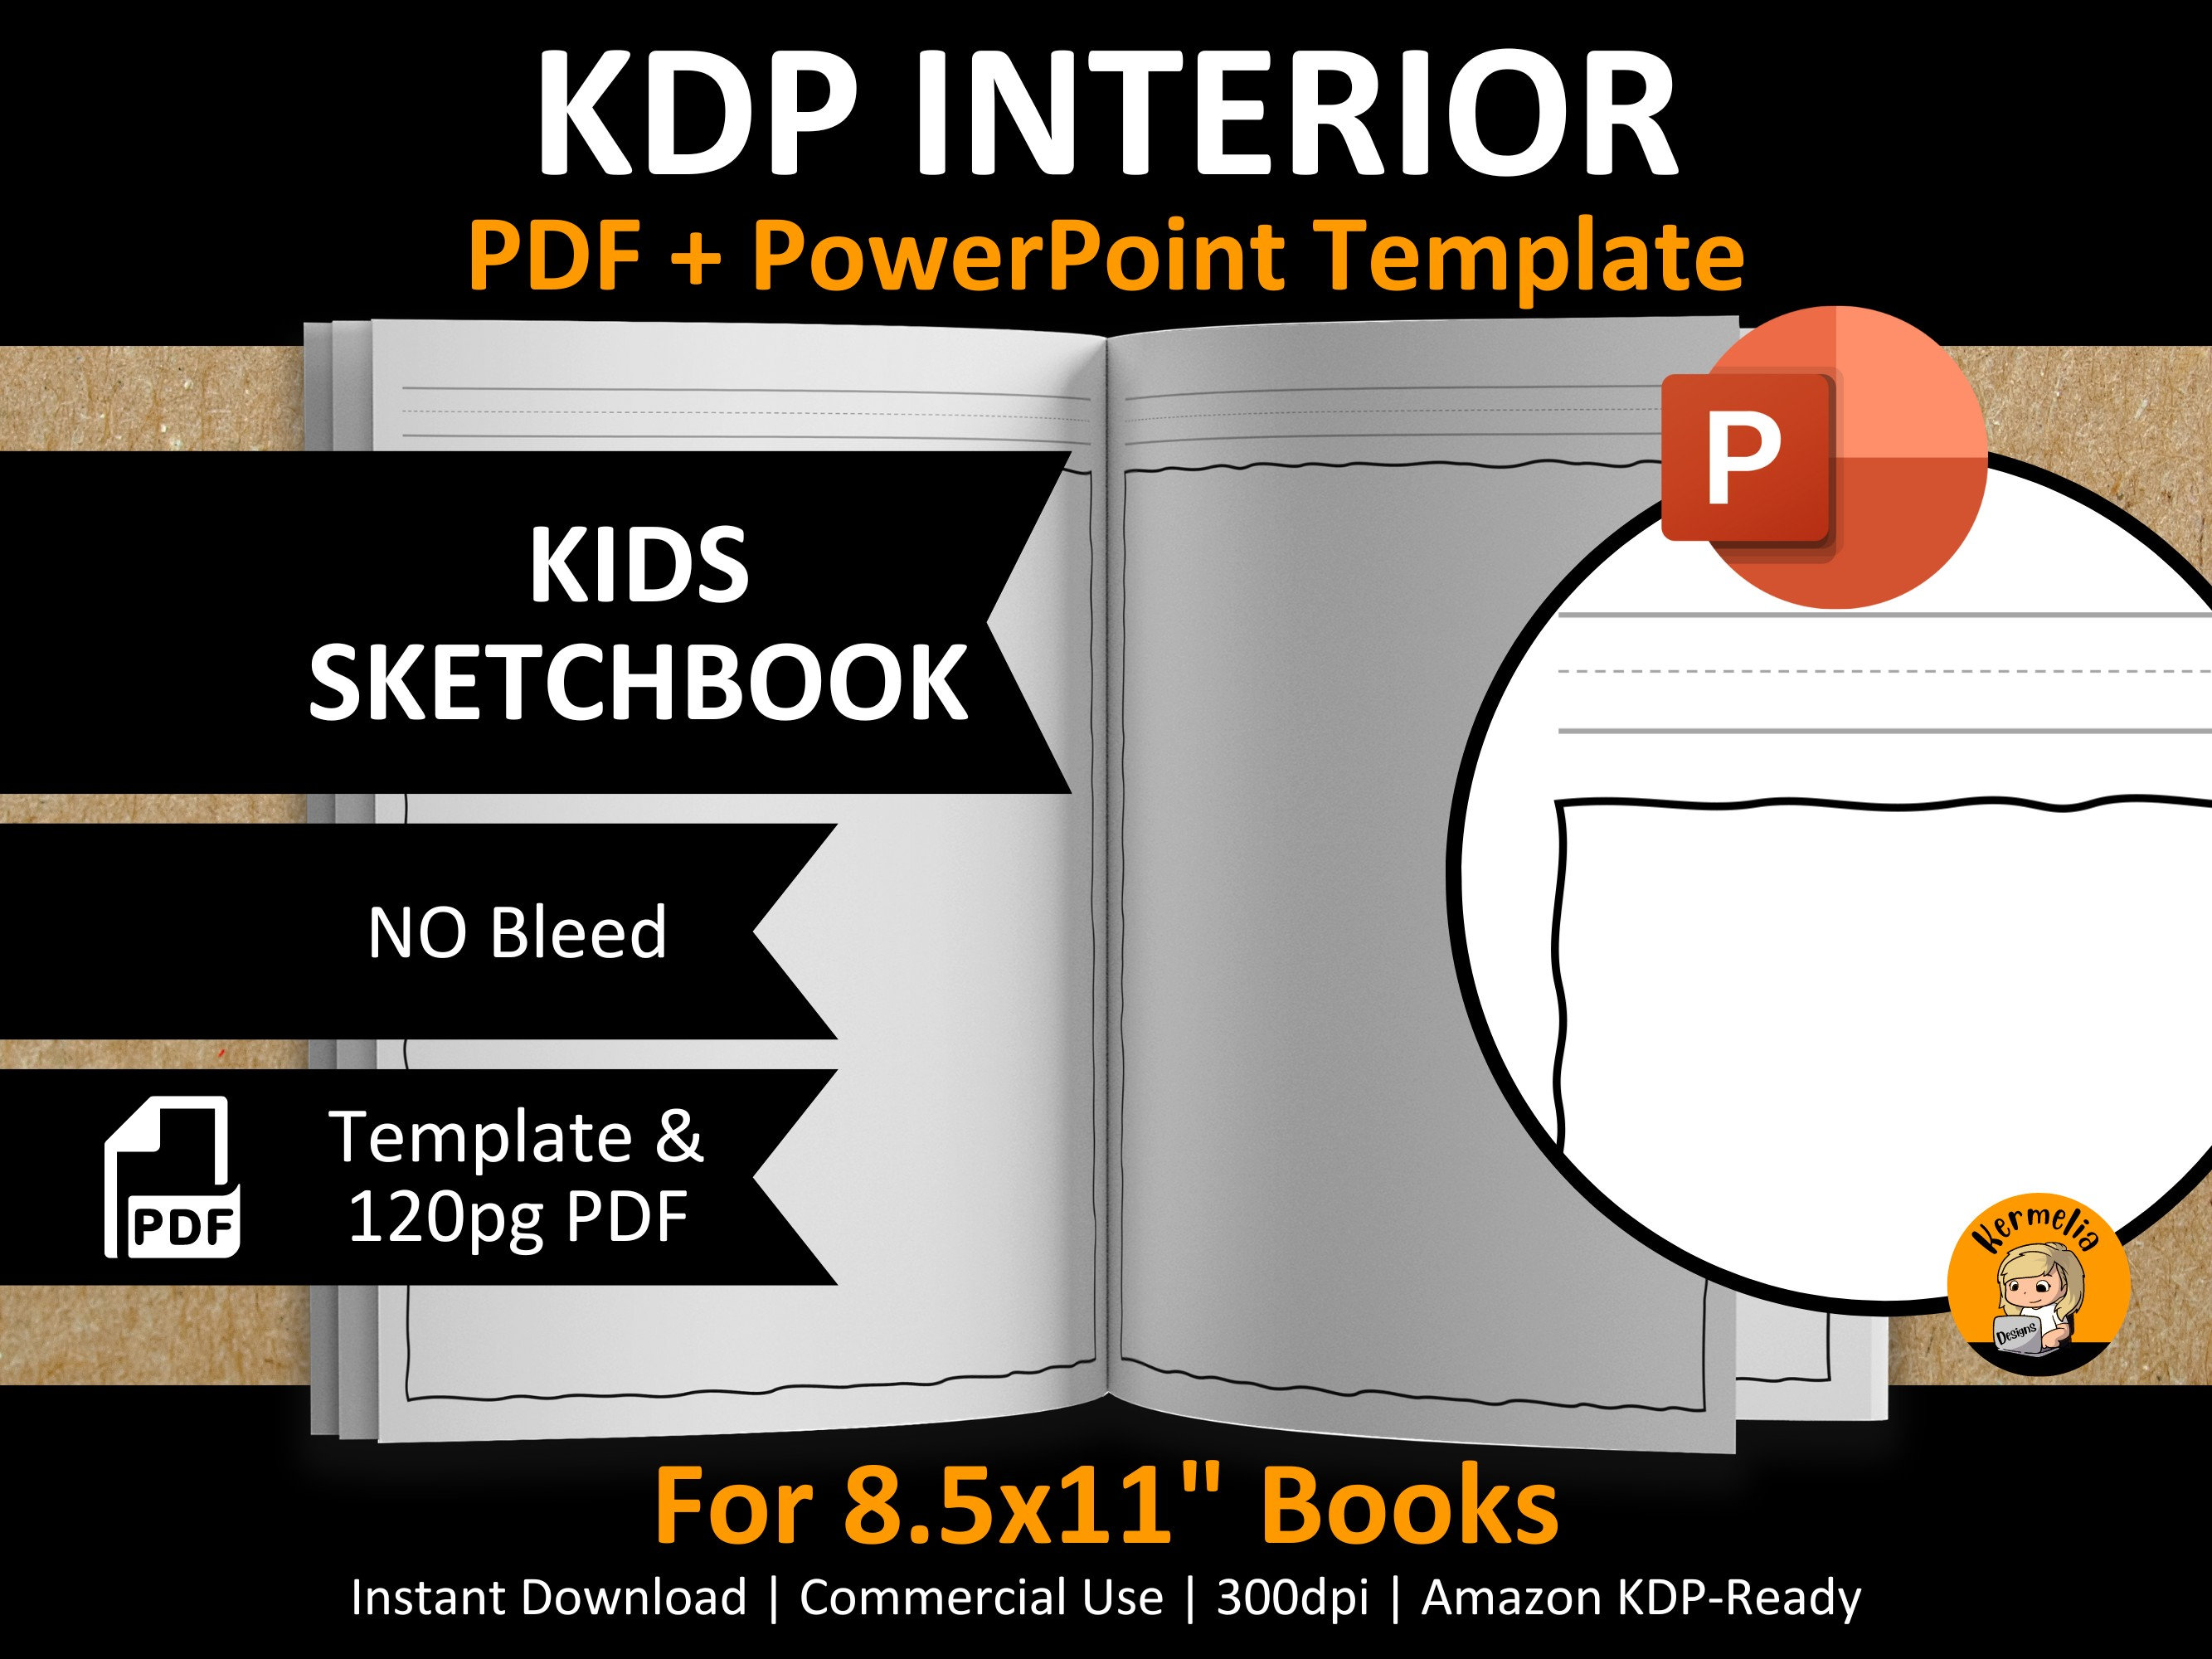 8.5x11 KIDS SKETCHBOOK Blank Interior Editable Template Notebook  Composition Journal for  KDP 120 Pages No Bleed Pdf Pptx 